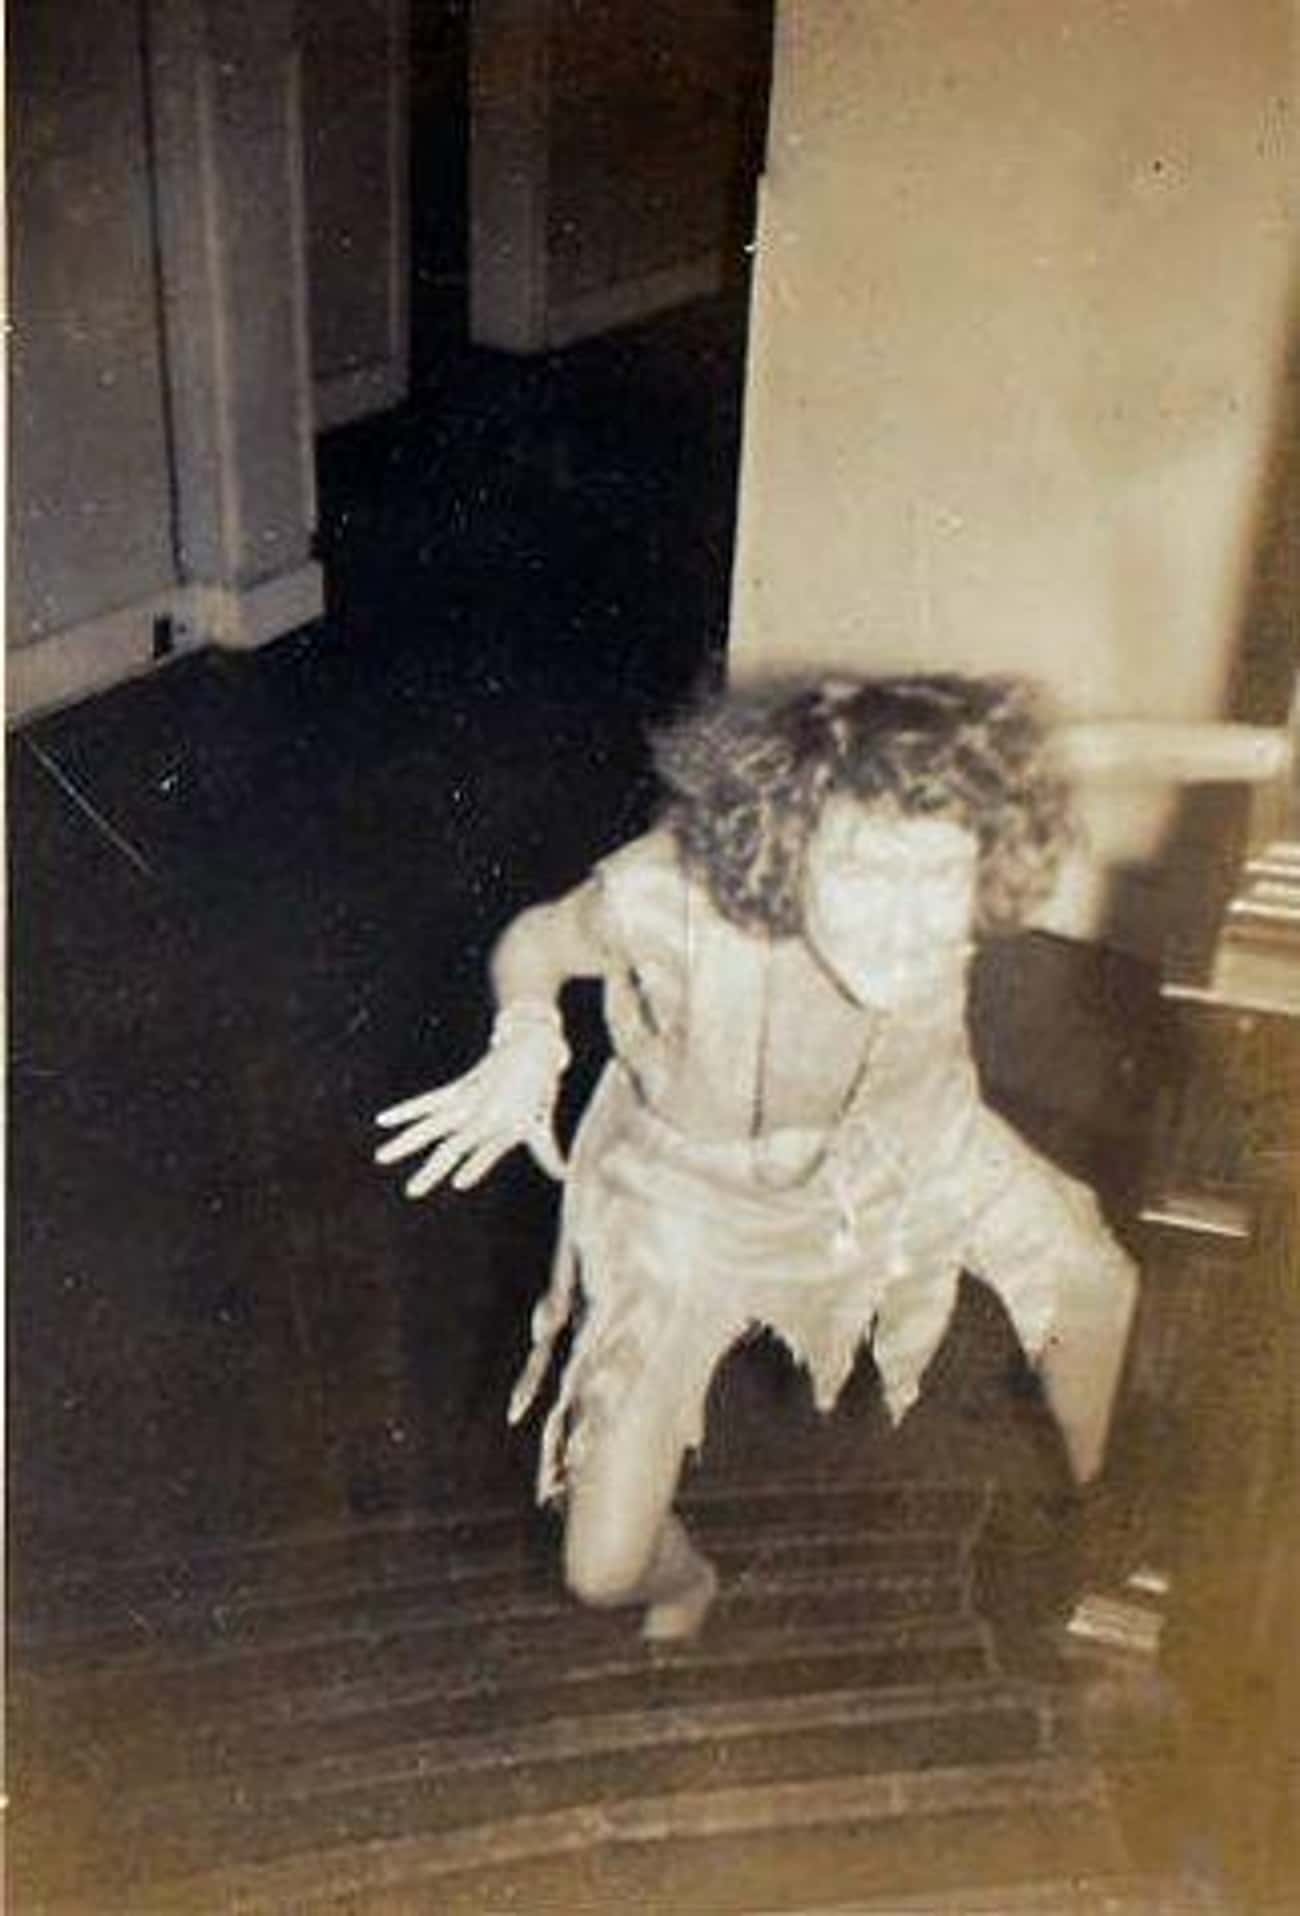 A Woman In Costume Creepily Climbing Stairs